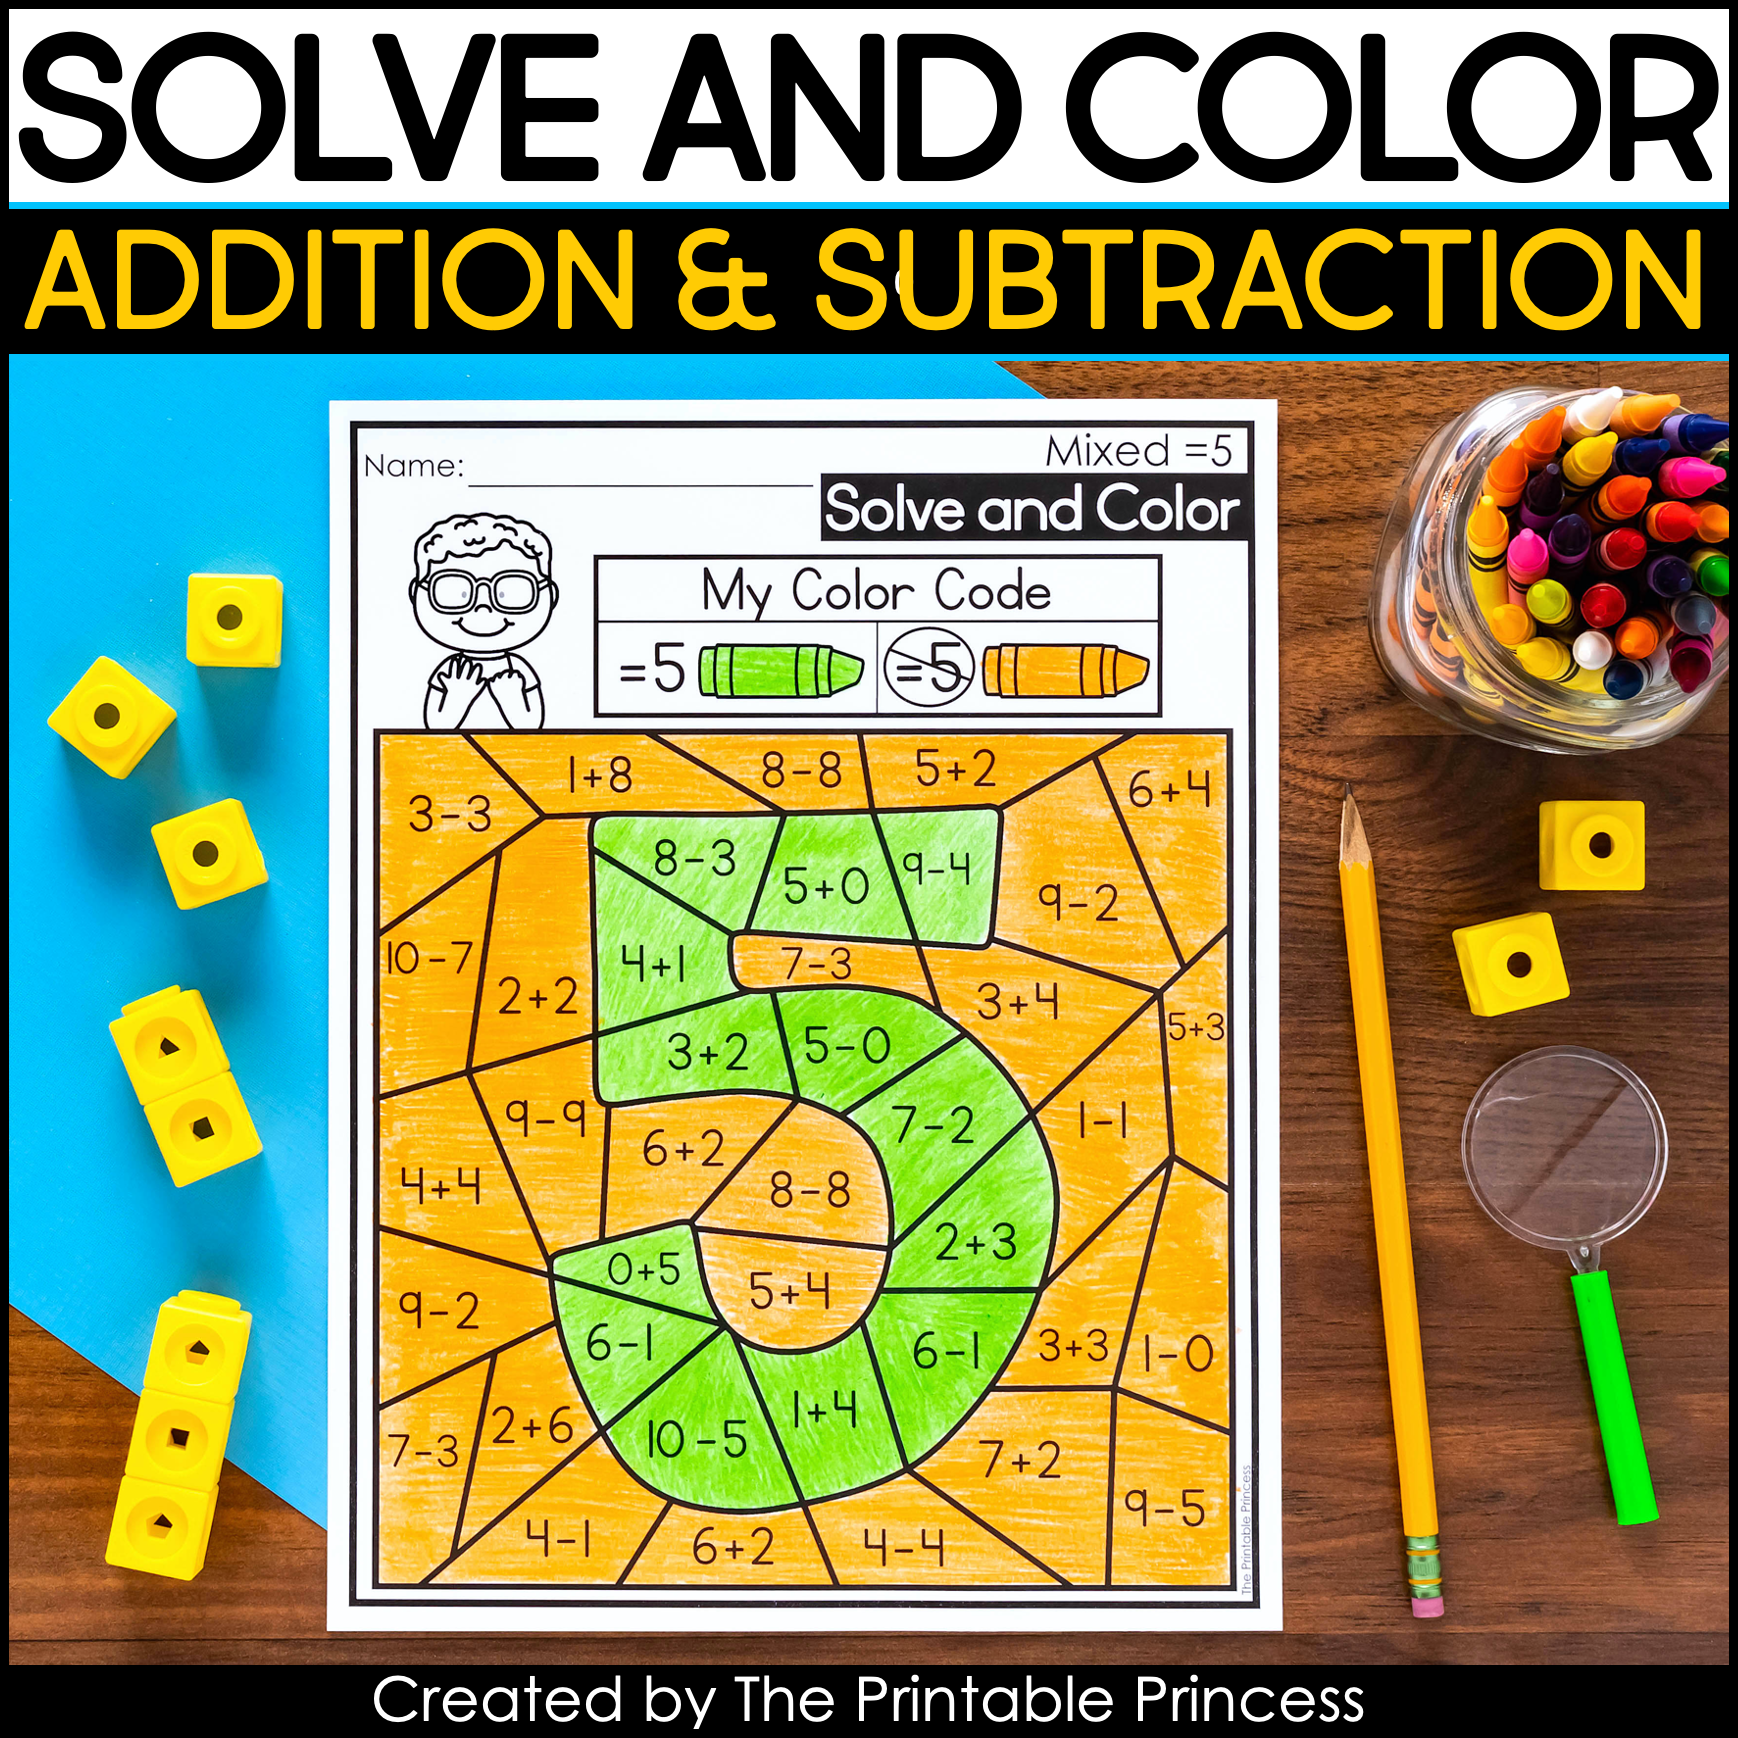 Solve and color addition and subtraction coloring pages